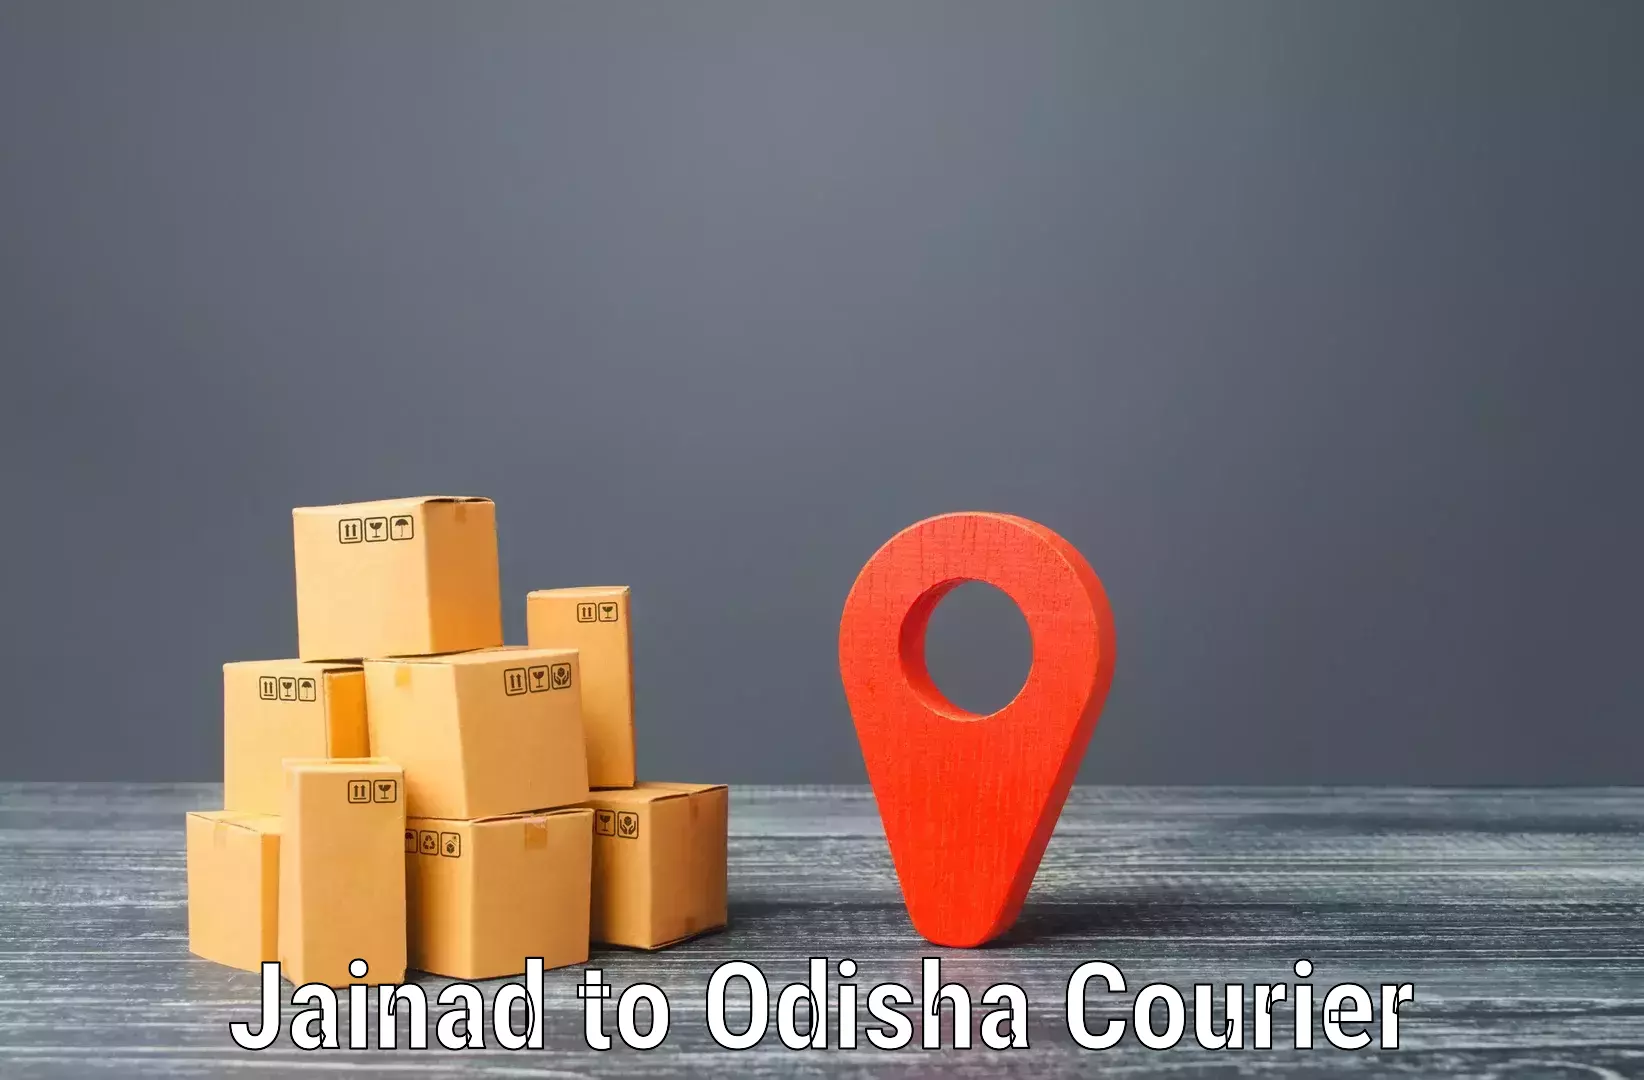 Custom courier packages Jainad to Odisha